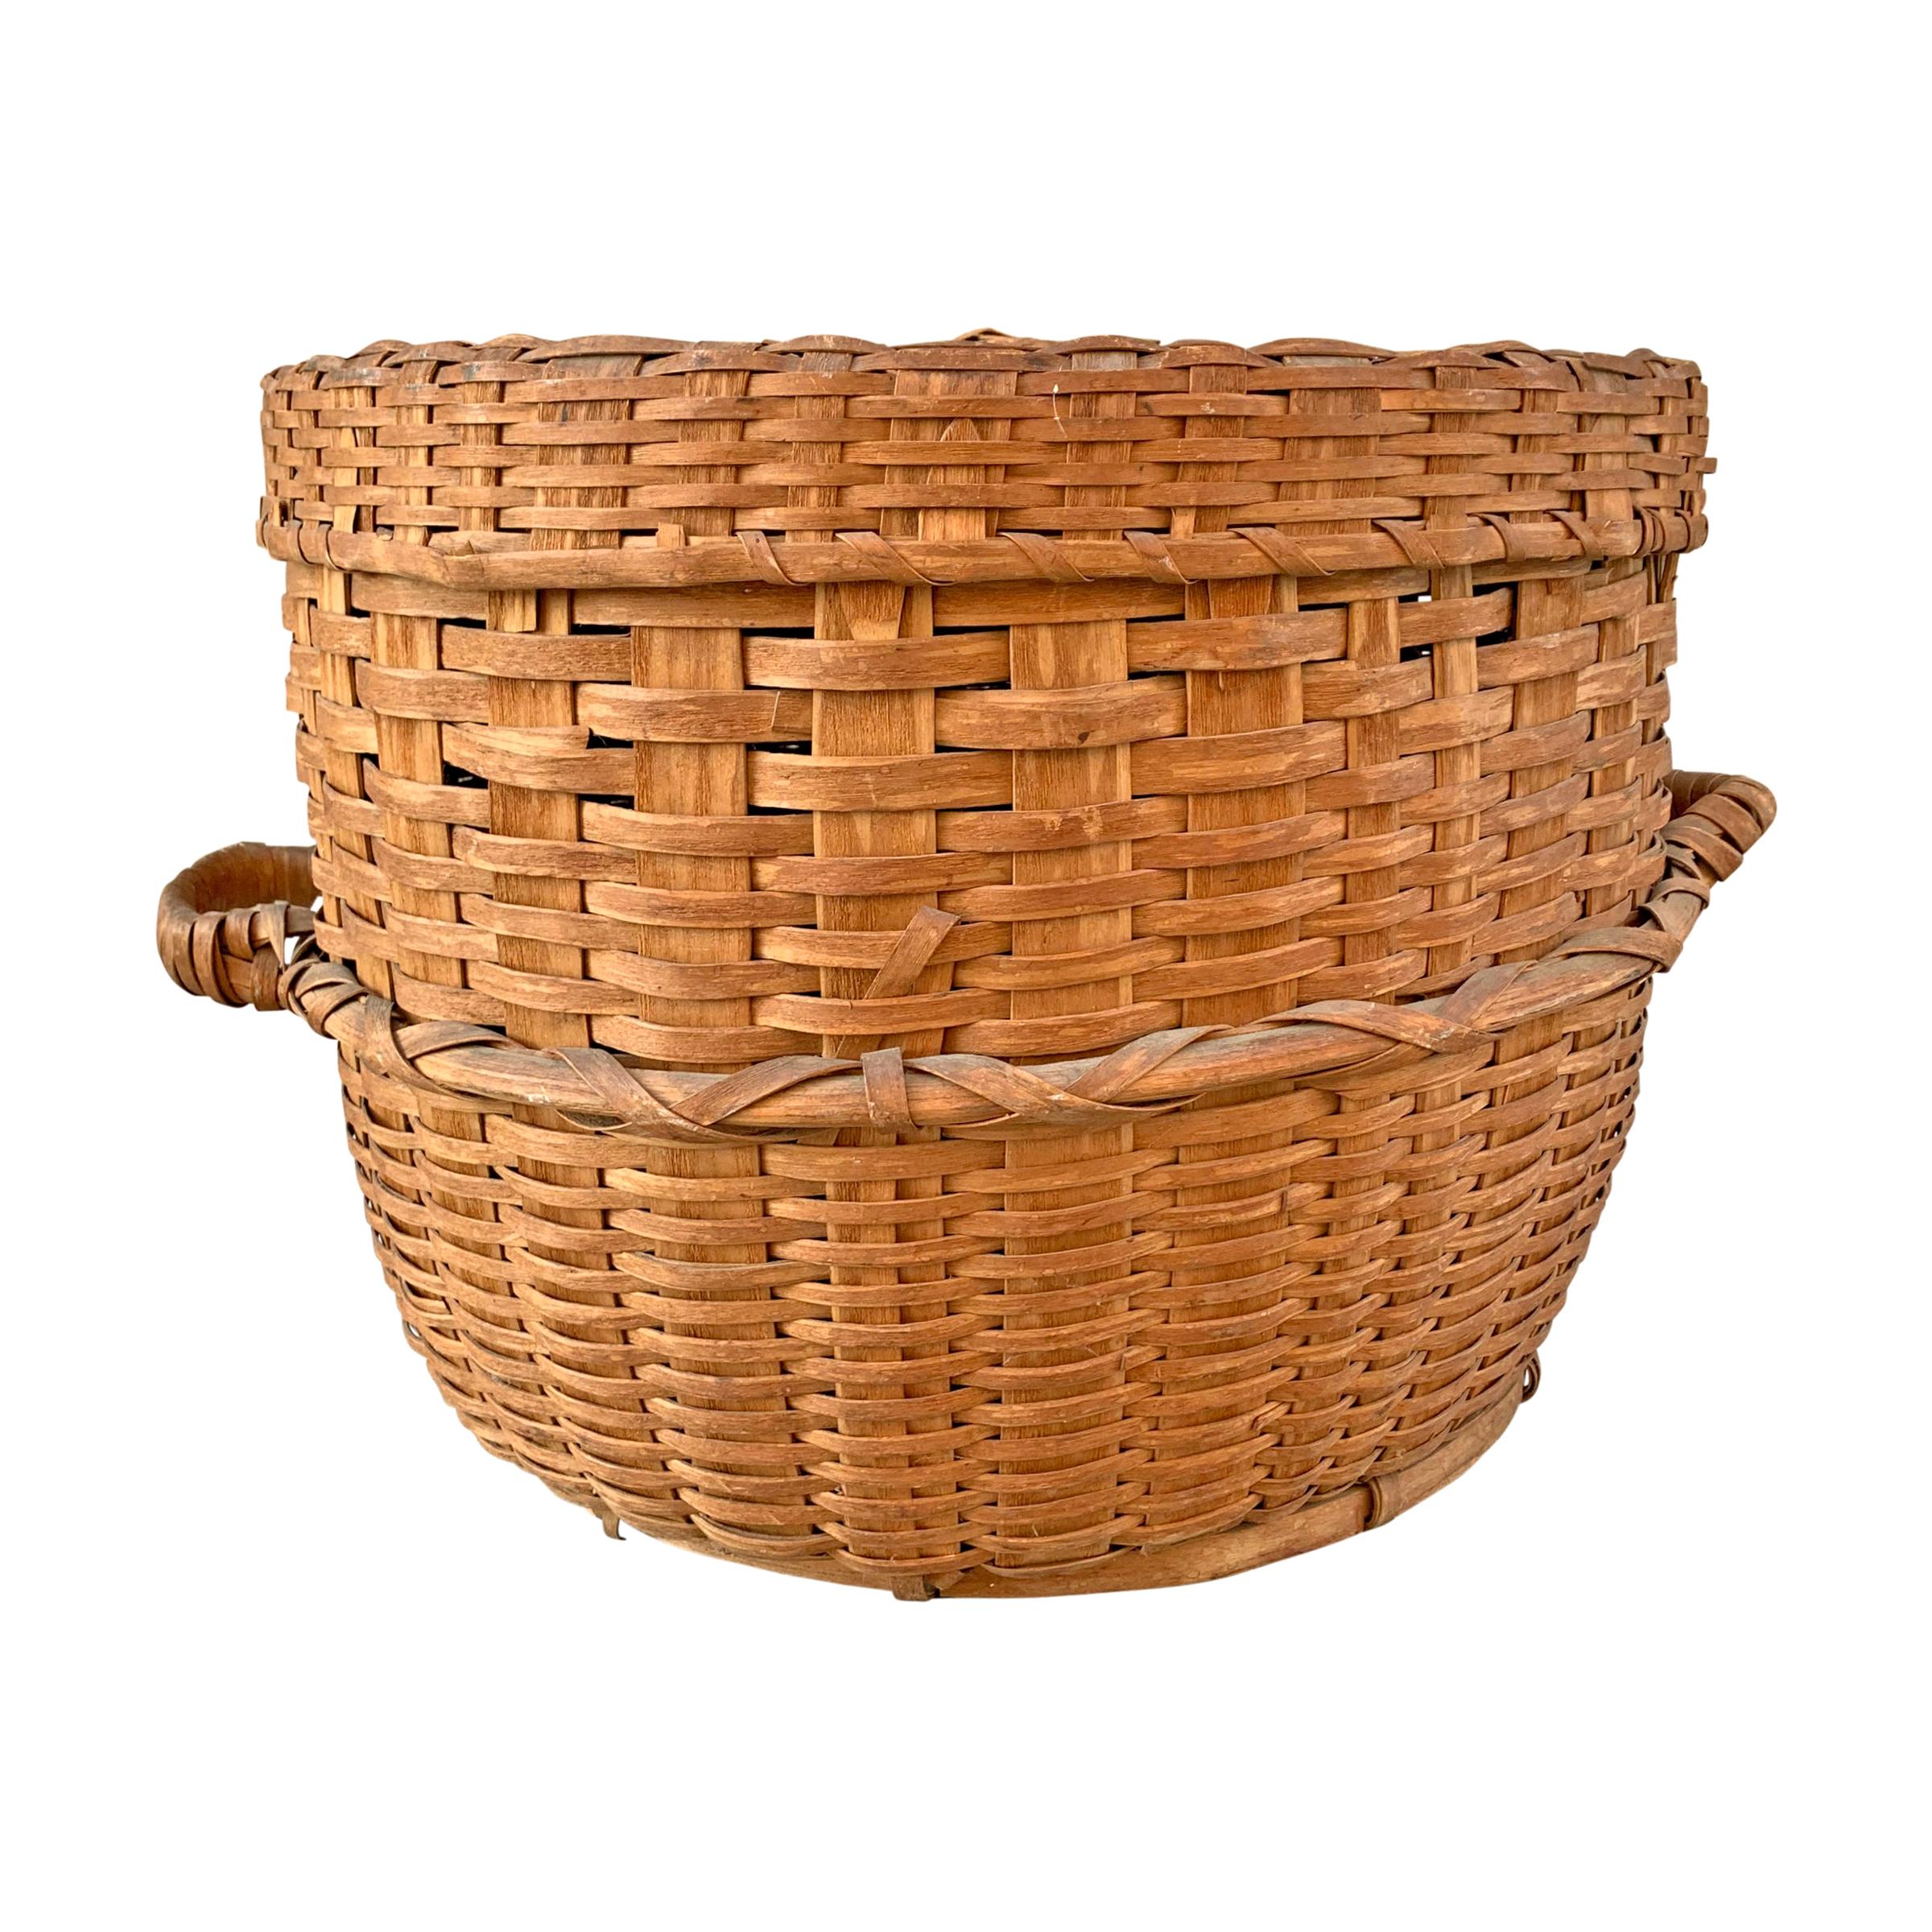 Monumental 19th Century American Feather Basket